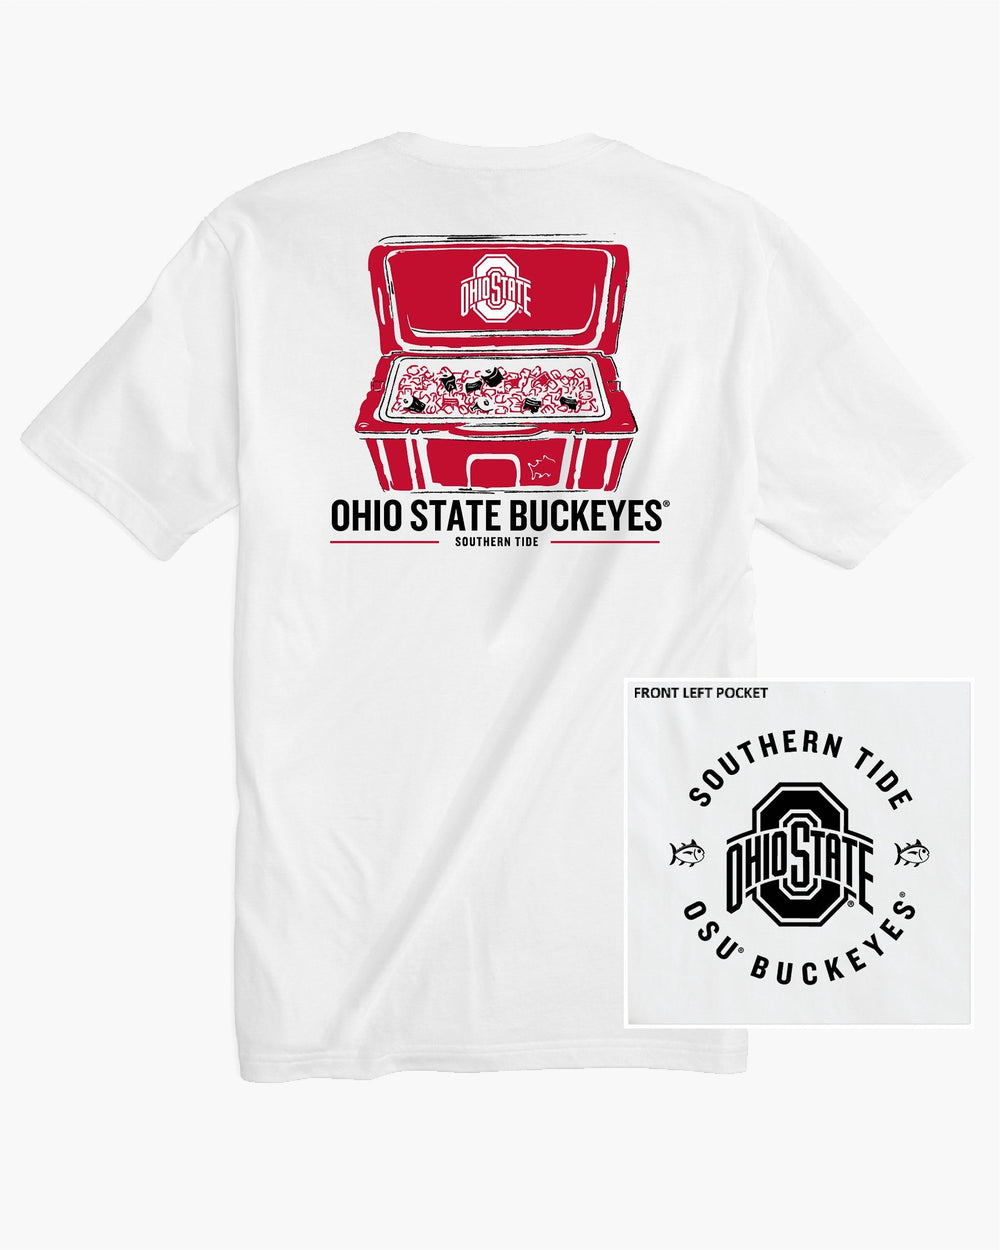 The back of the Men's Ohio State Buckeyes Cooler Short Sleeve T-Shirt - Classic White